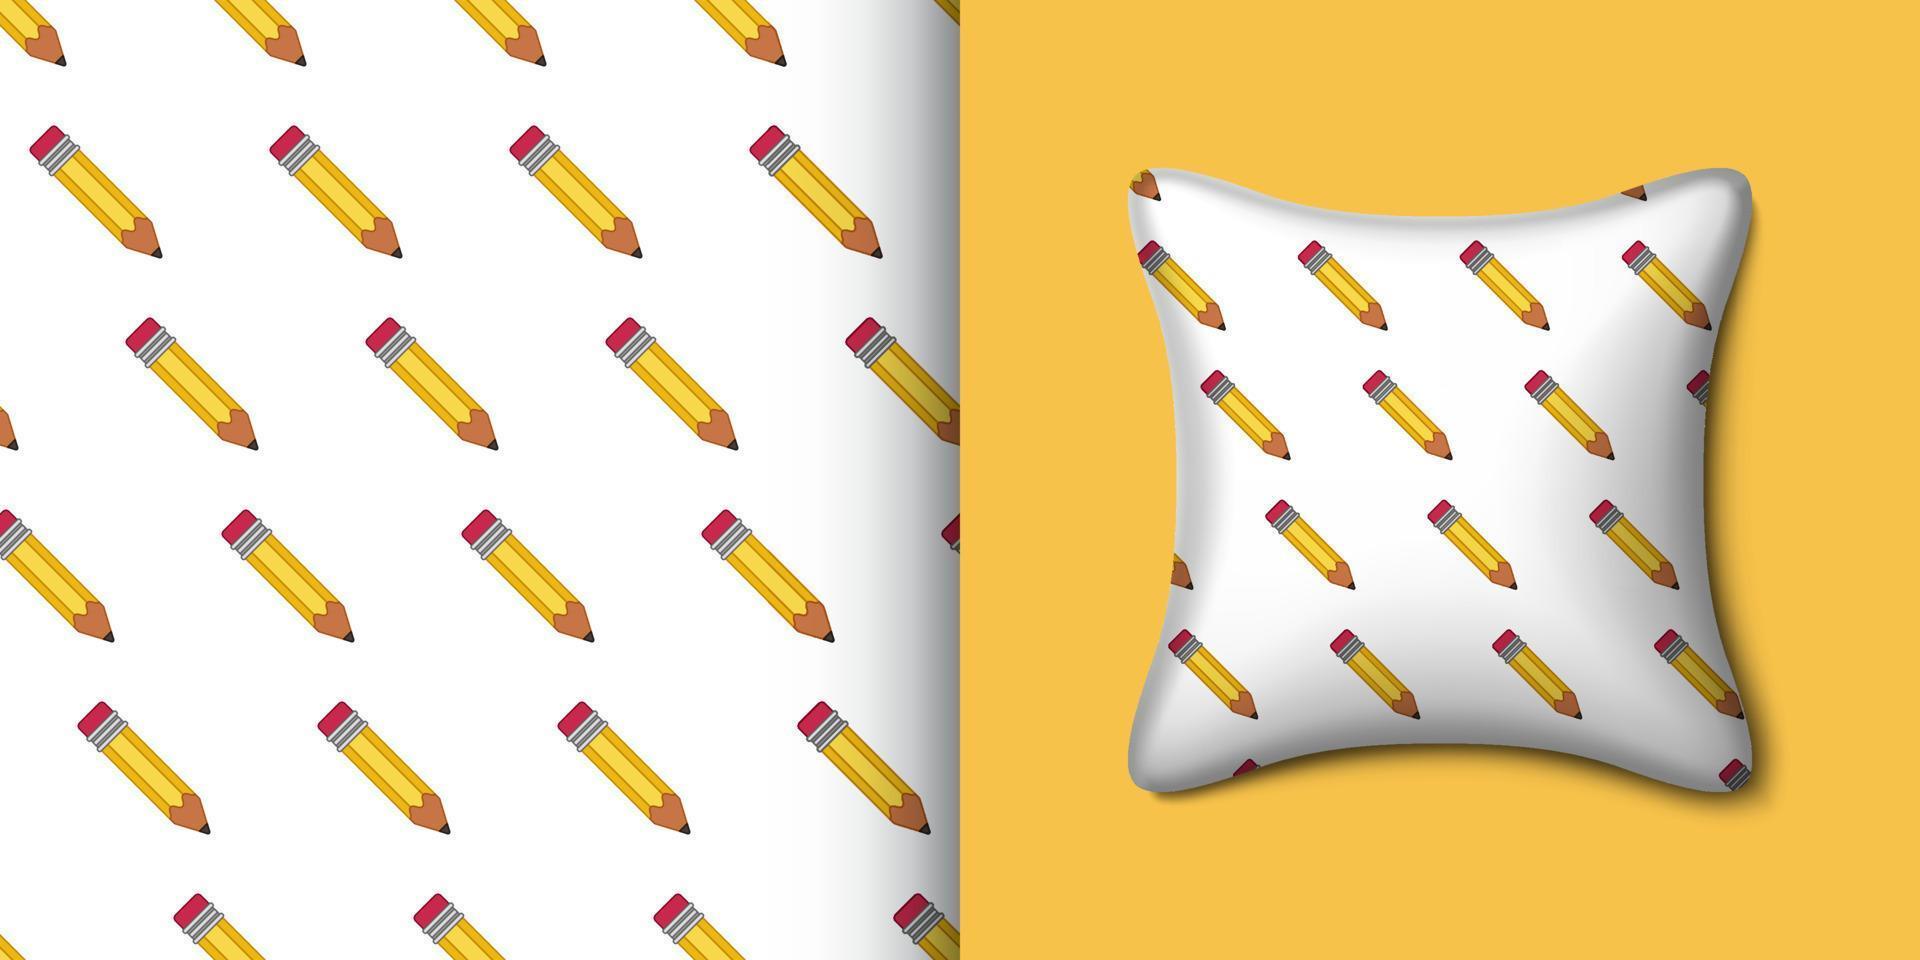 Pencil seamless pattern with pillow. Vector illustration